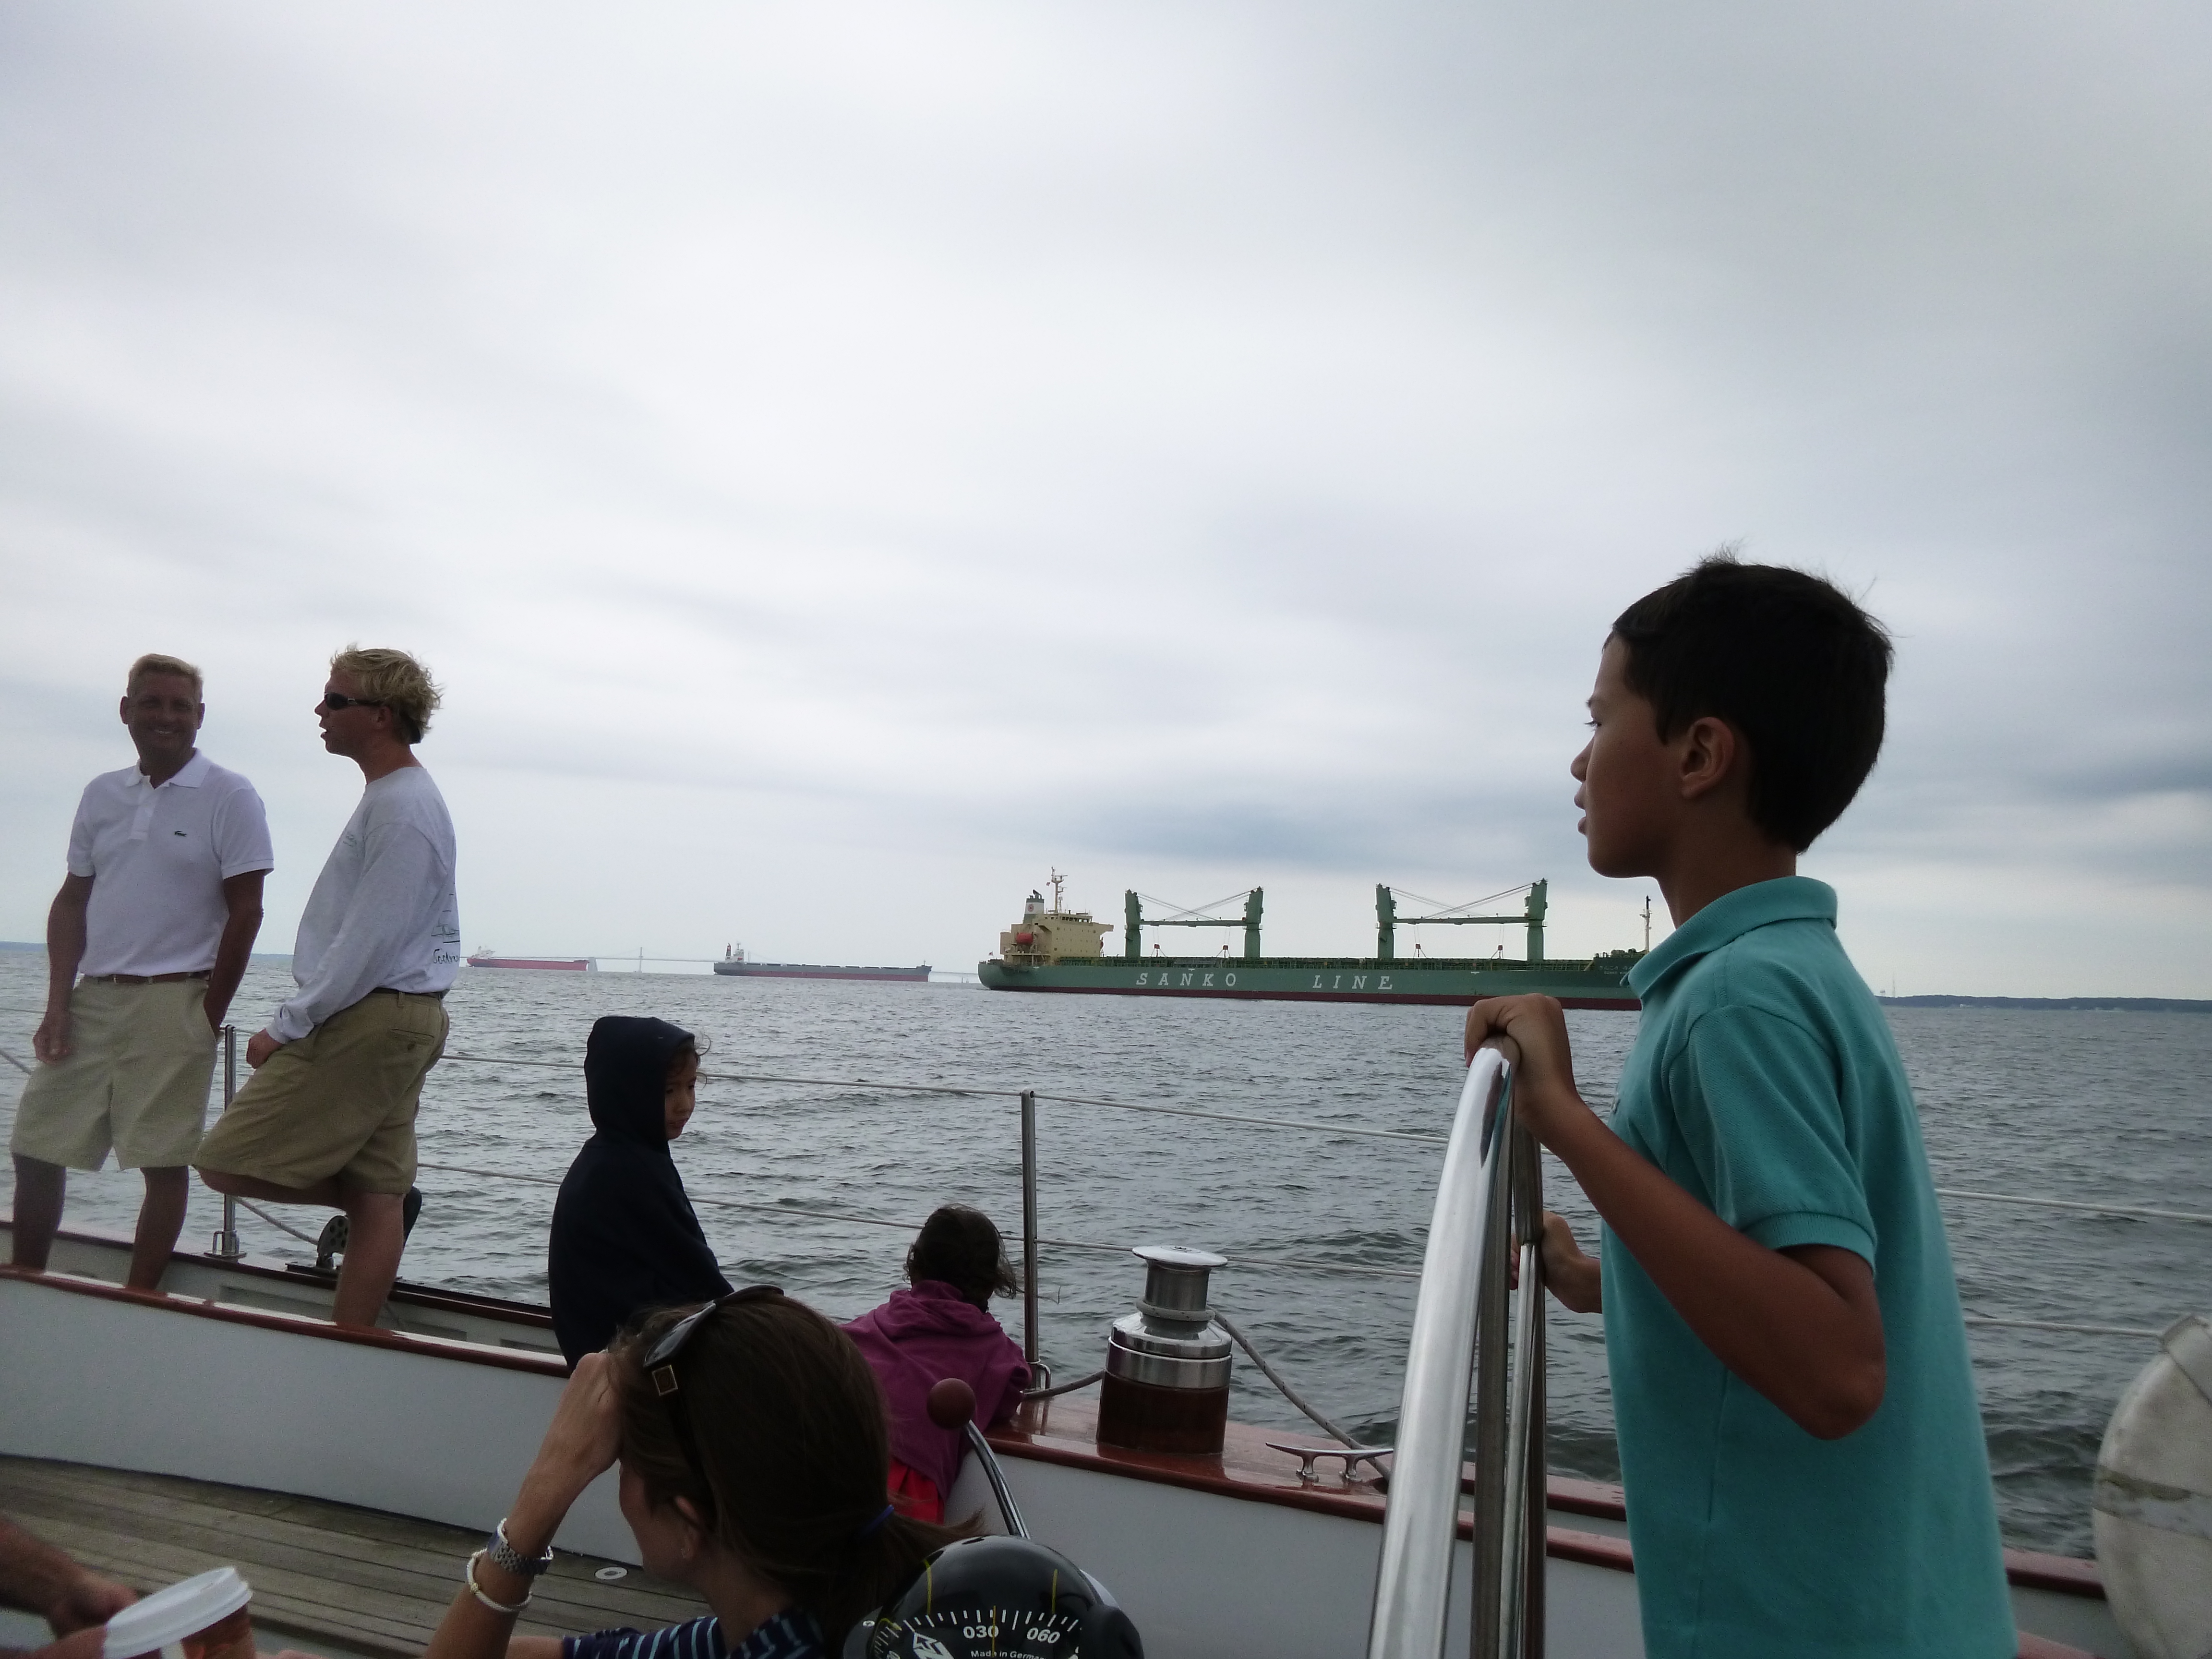 Sailing by an anchored cargo ship on the Chesapeake Bay.